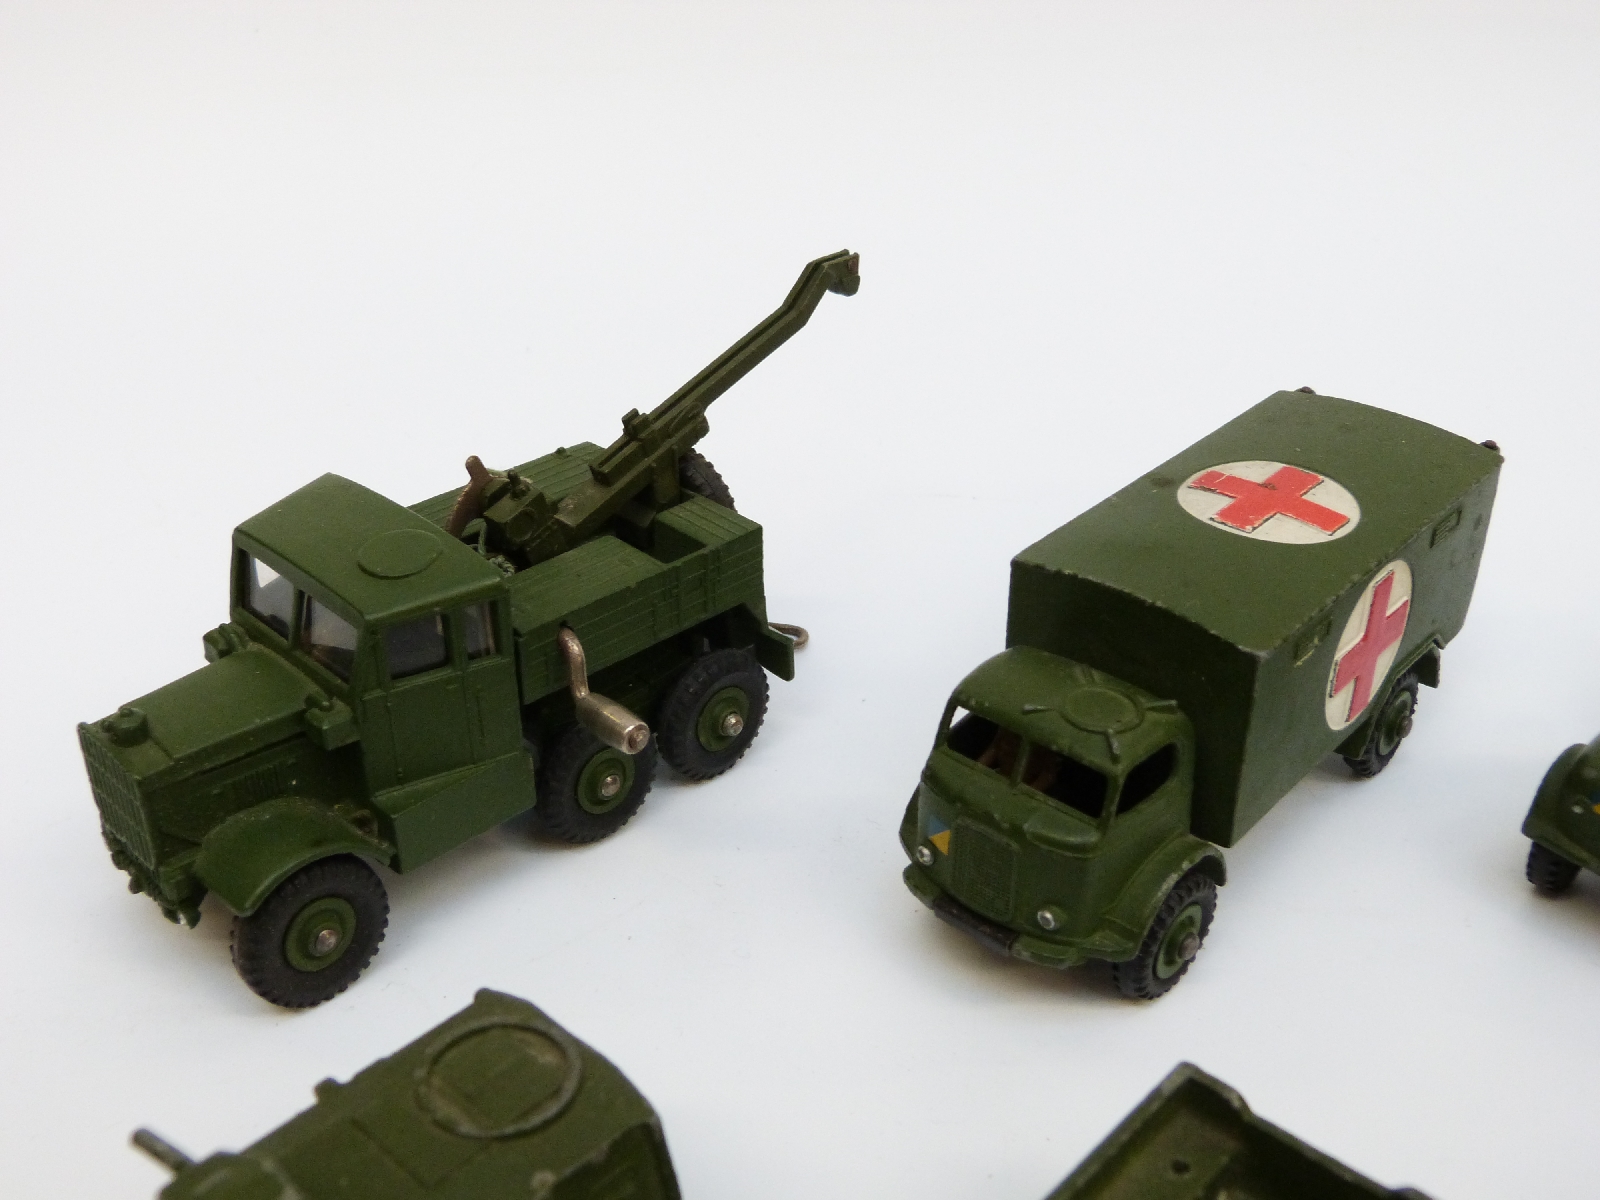 Ten Dinky Toys and Supertoys diecast model military vehicles including Military Ambulance, - Image 7 of 9